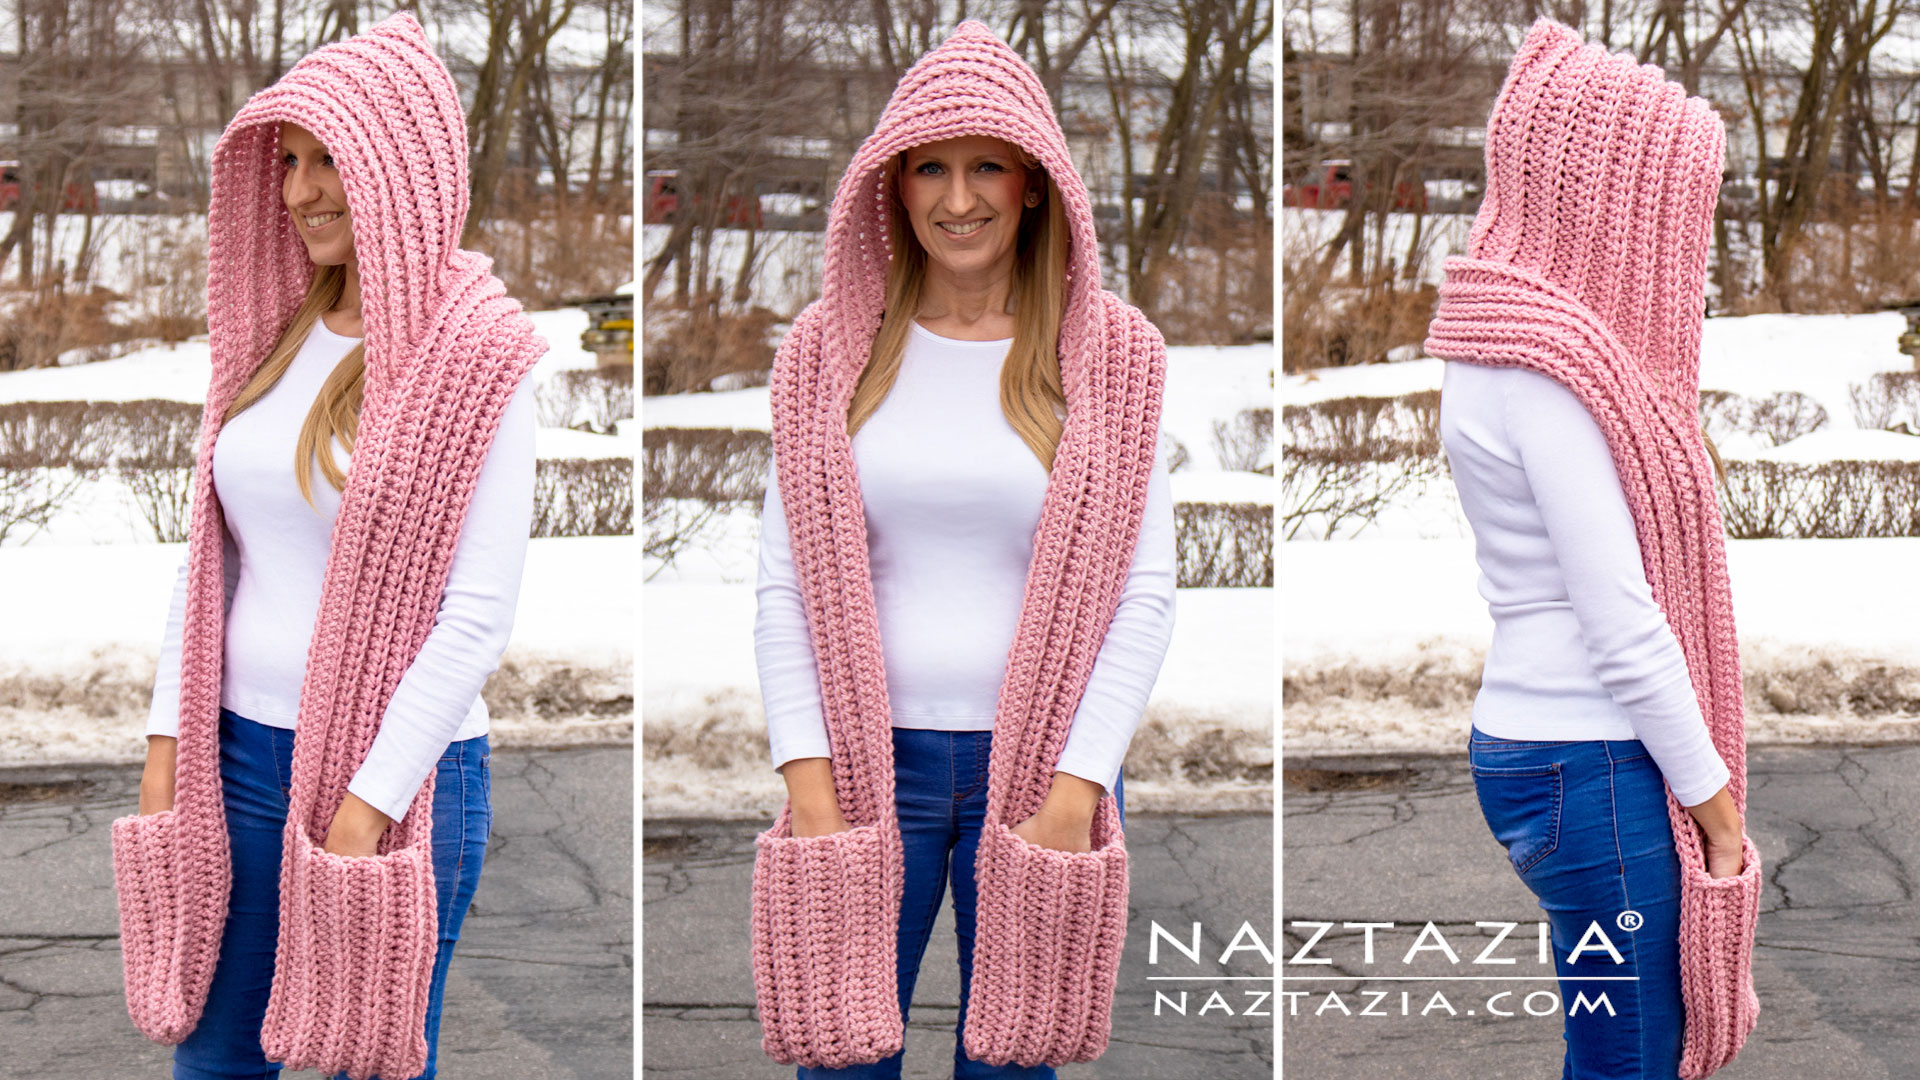 How to crochet a hooded scarf 